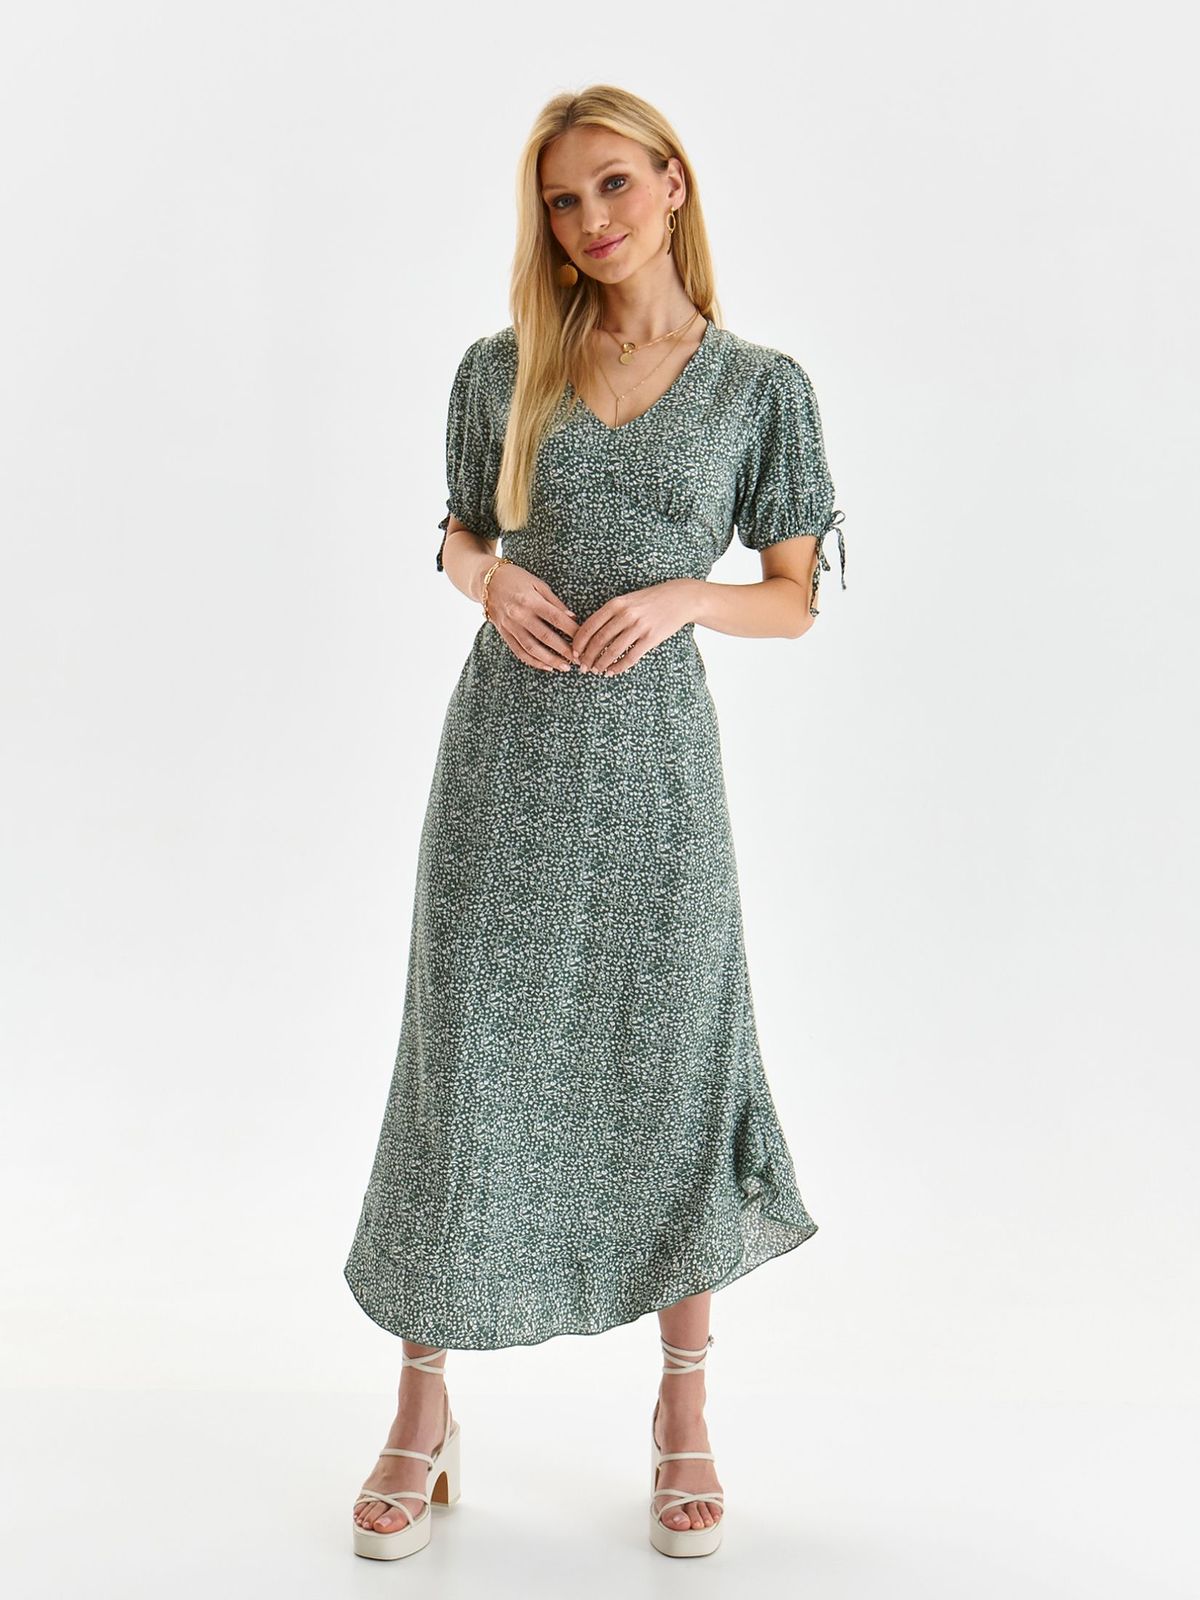 Green dress thin fabric cloche with puffed sleeves short sleeves